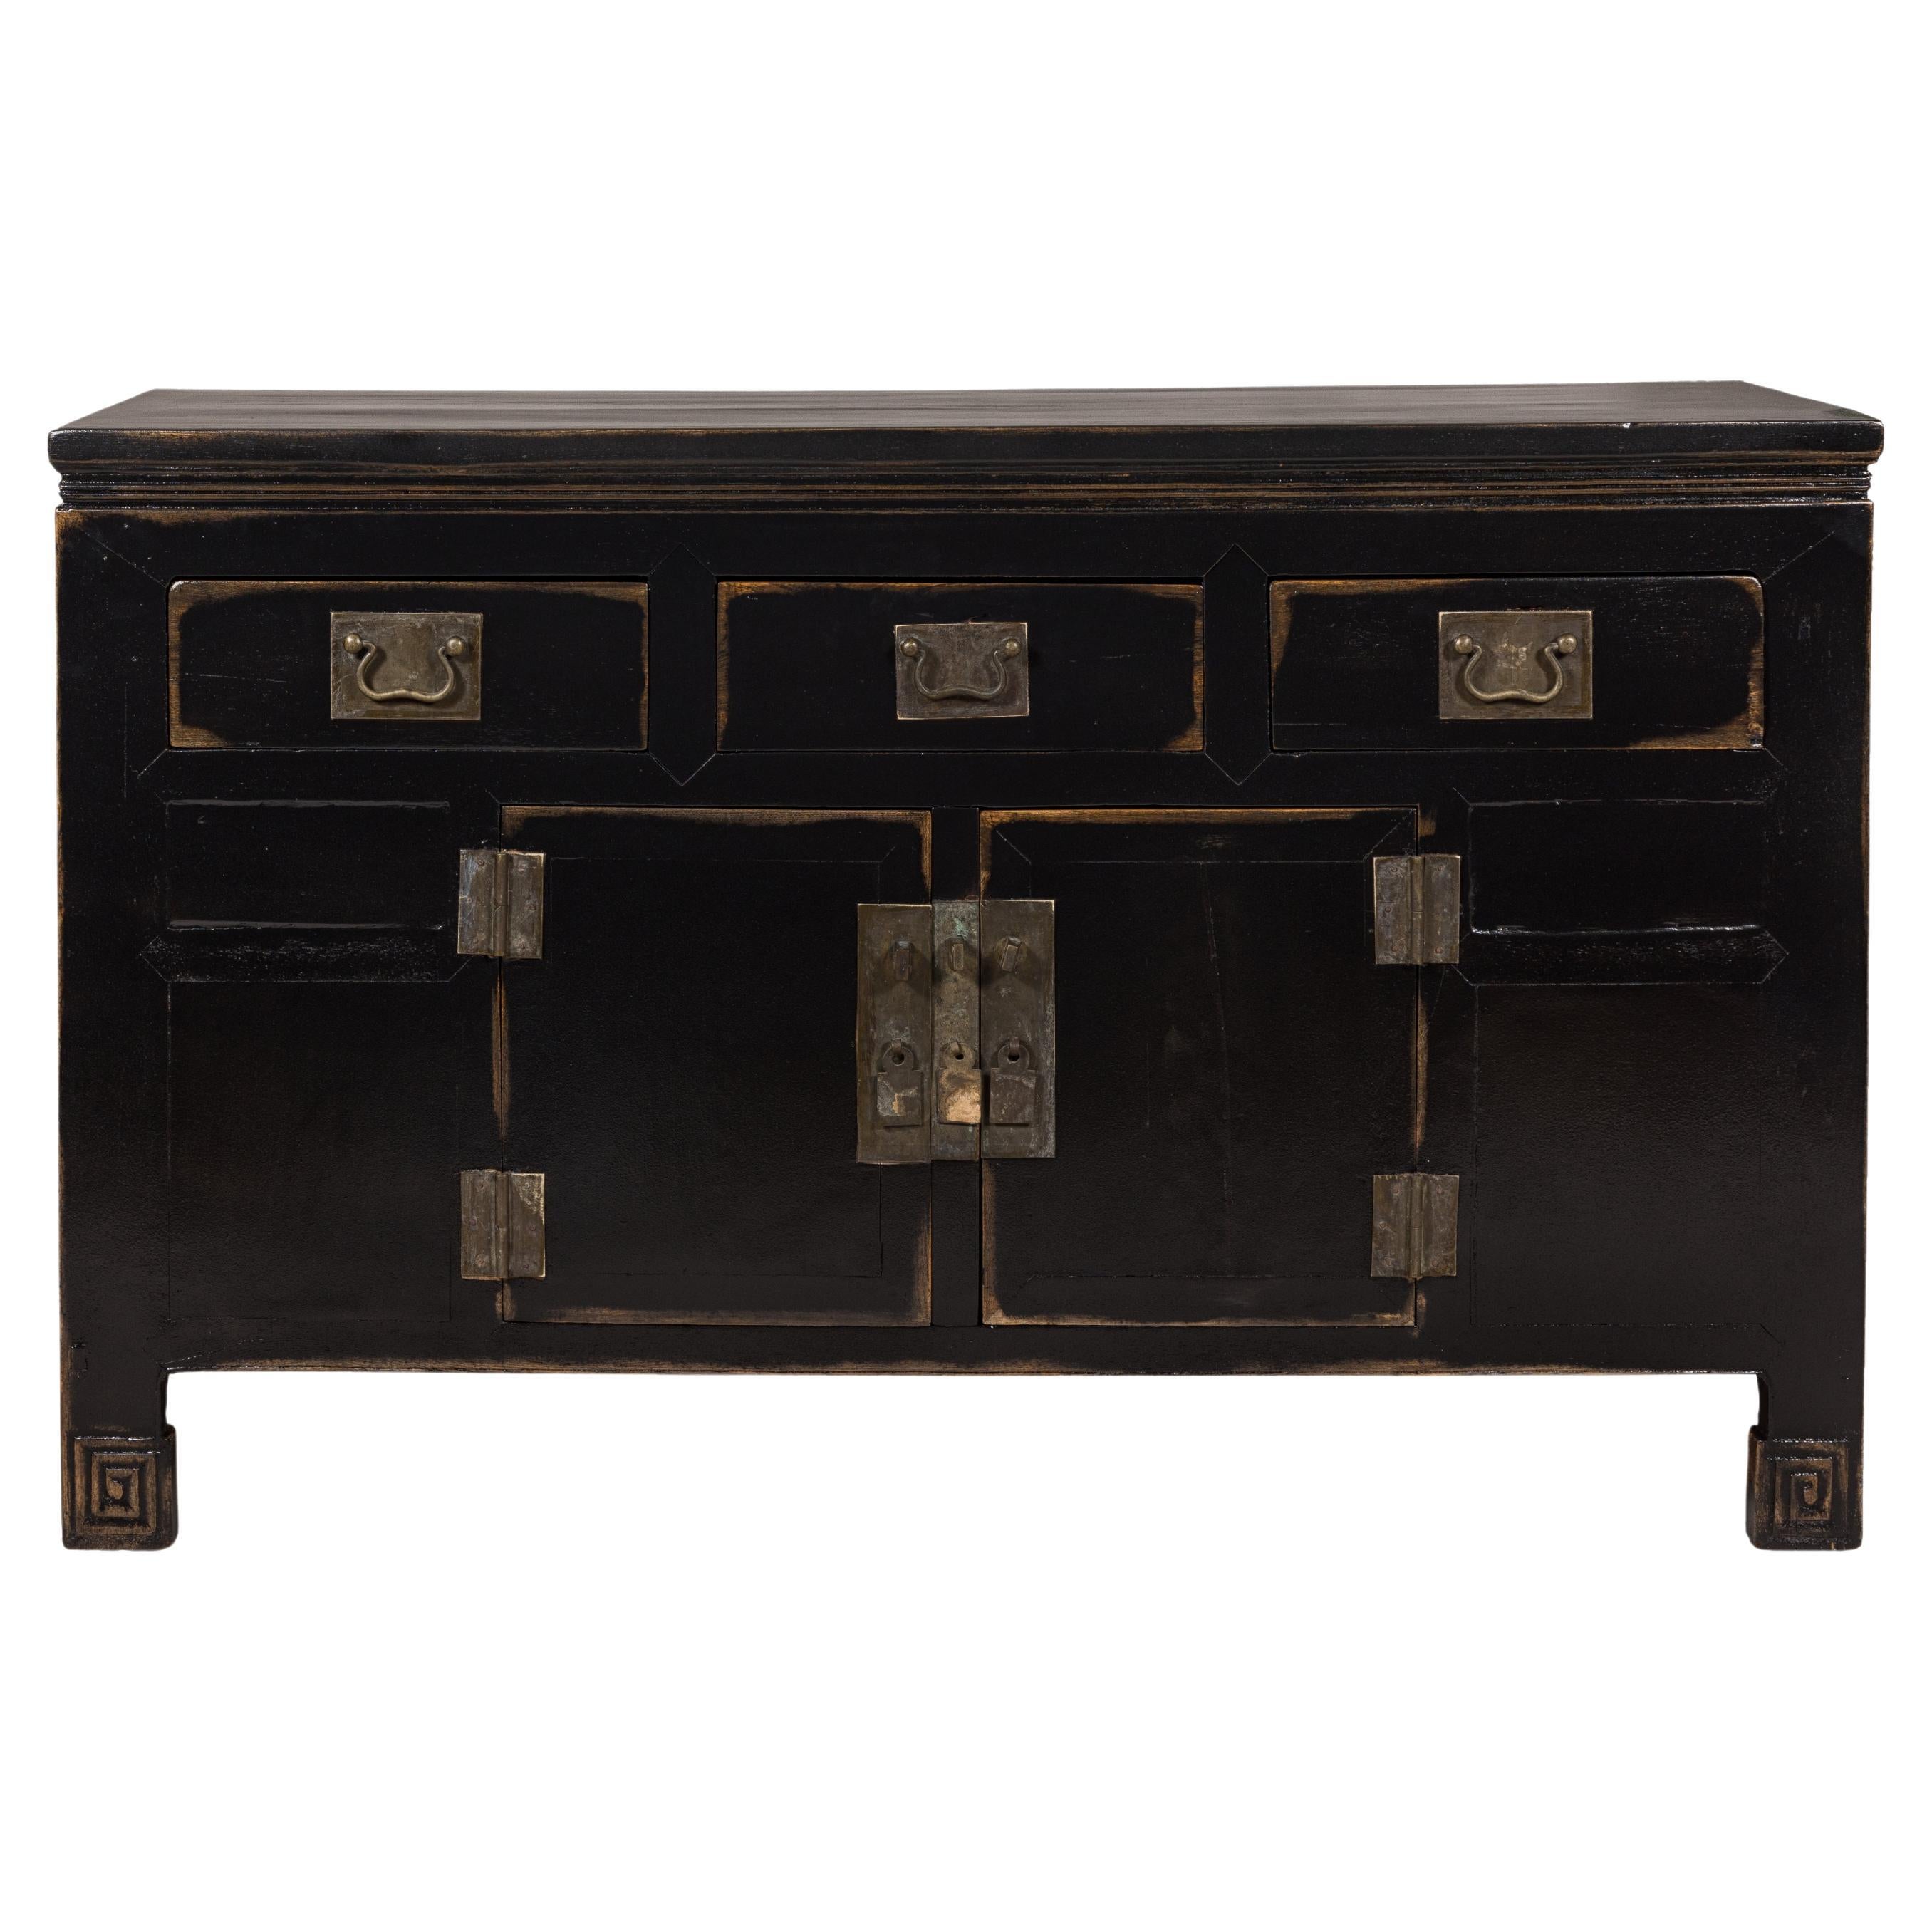 Black Lacquer Sideboard with Rubbed Edges, Brass Hardware, Doors and Drawers For Sale